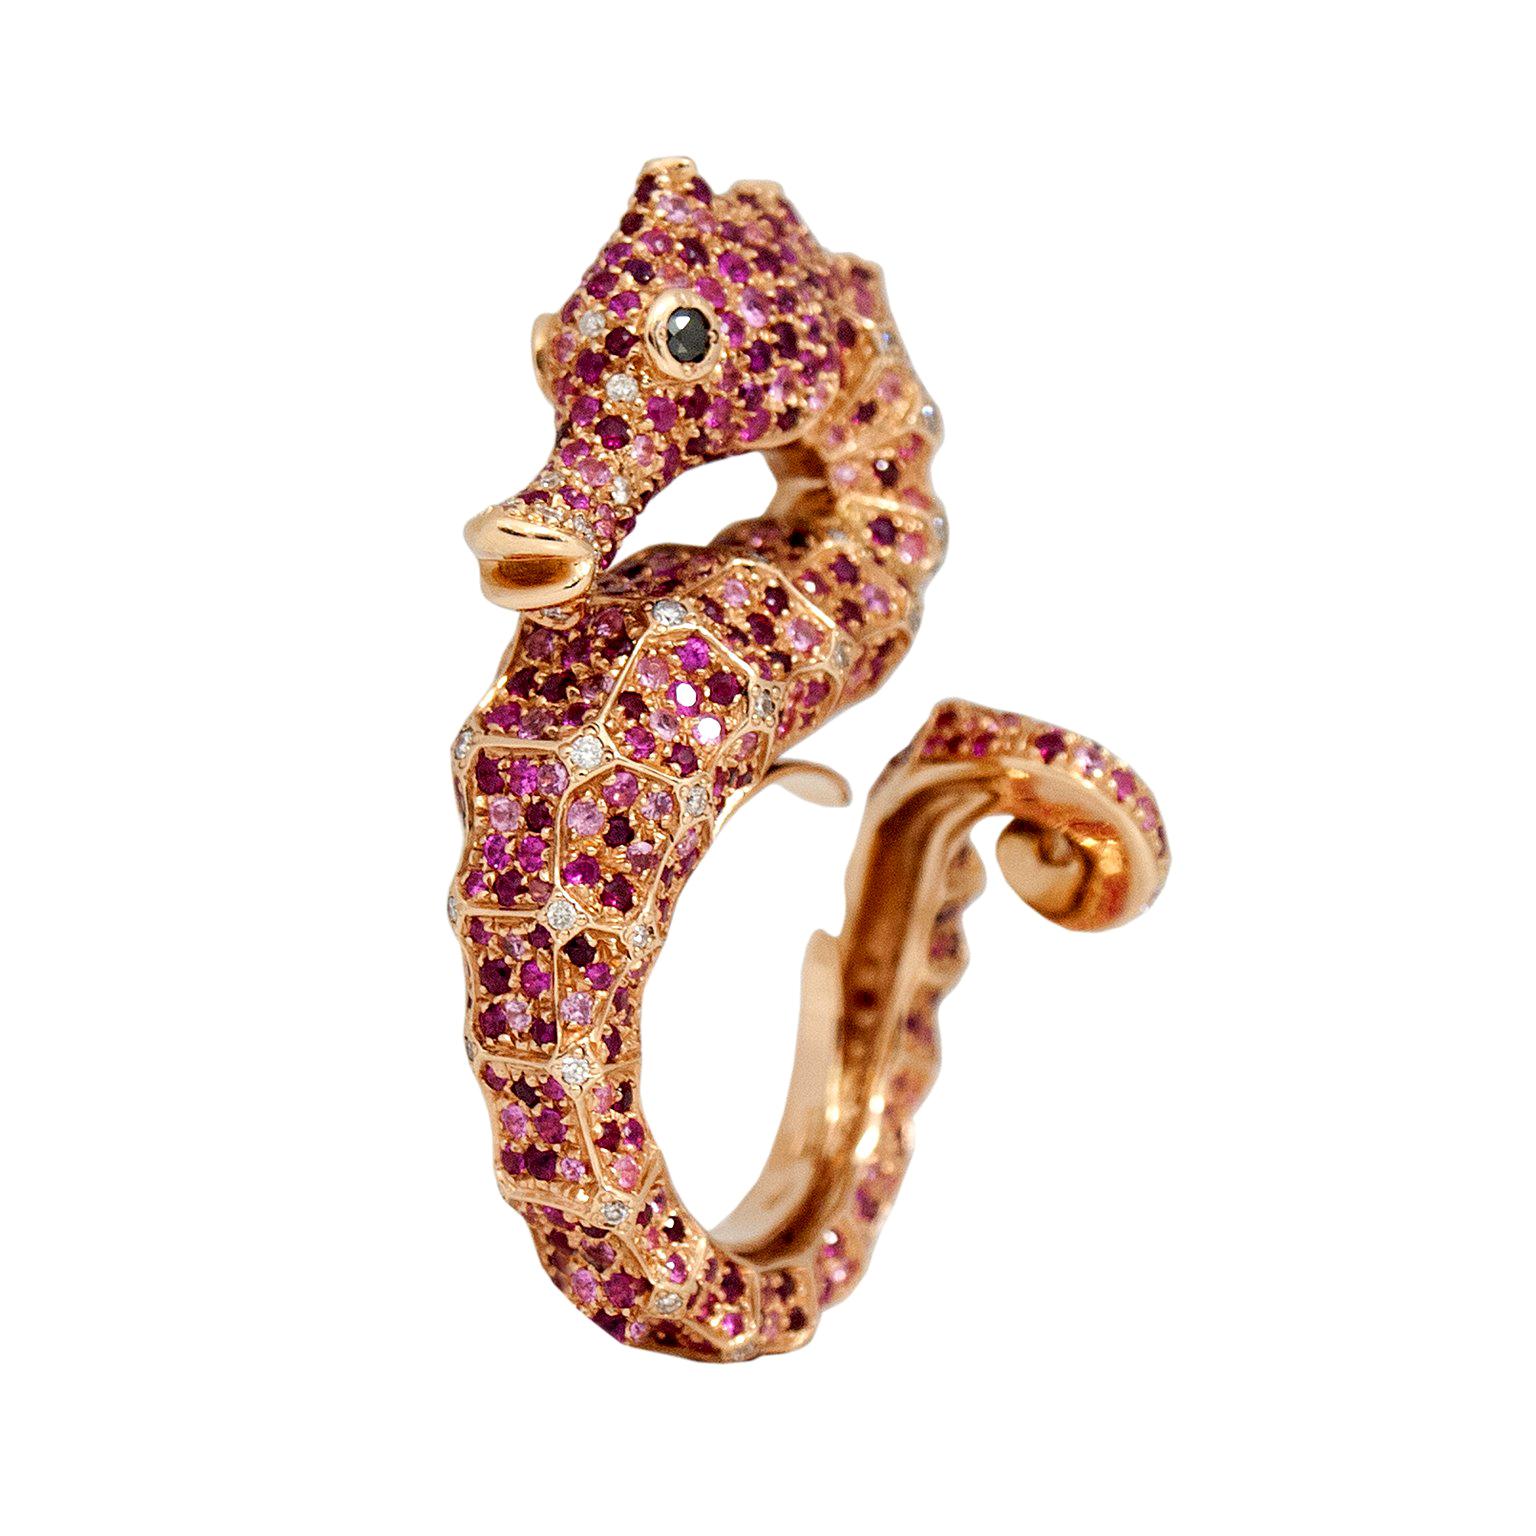 Petronilla Hippocampus Sea Horse Diamond Pink Sapphire Ruby 18Kt Gold Ring